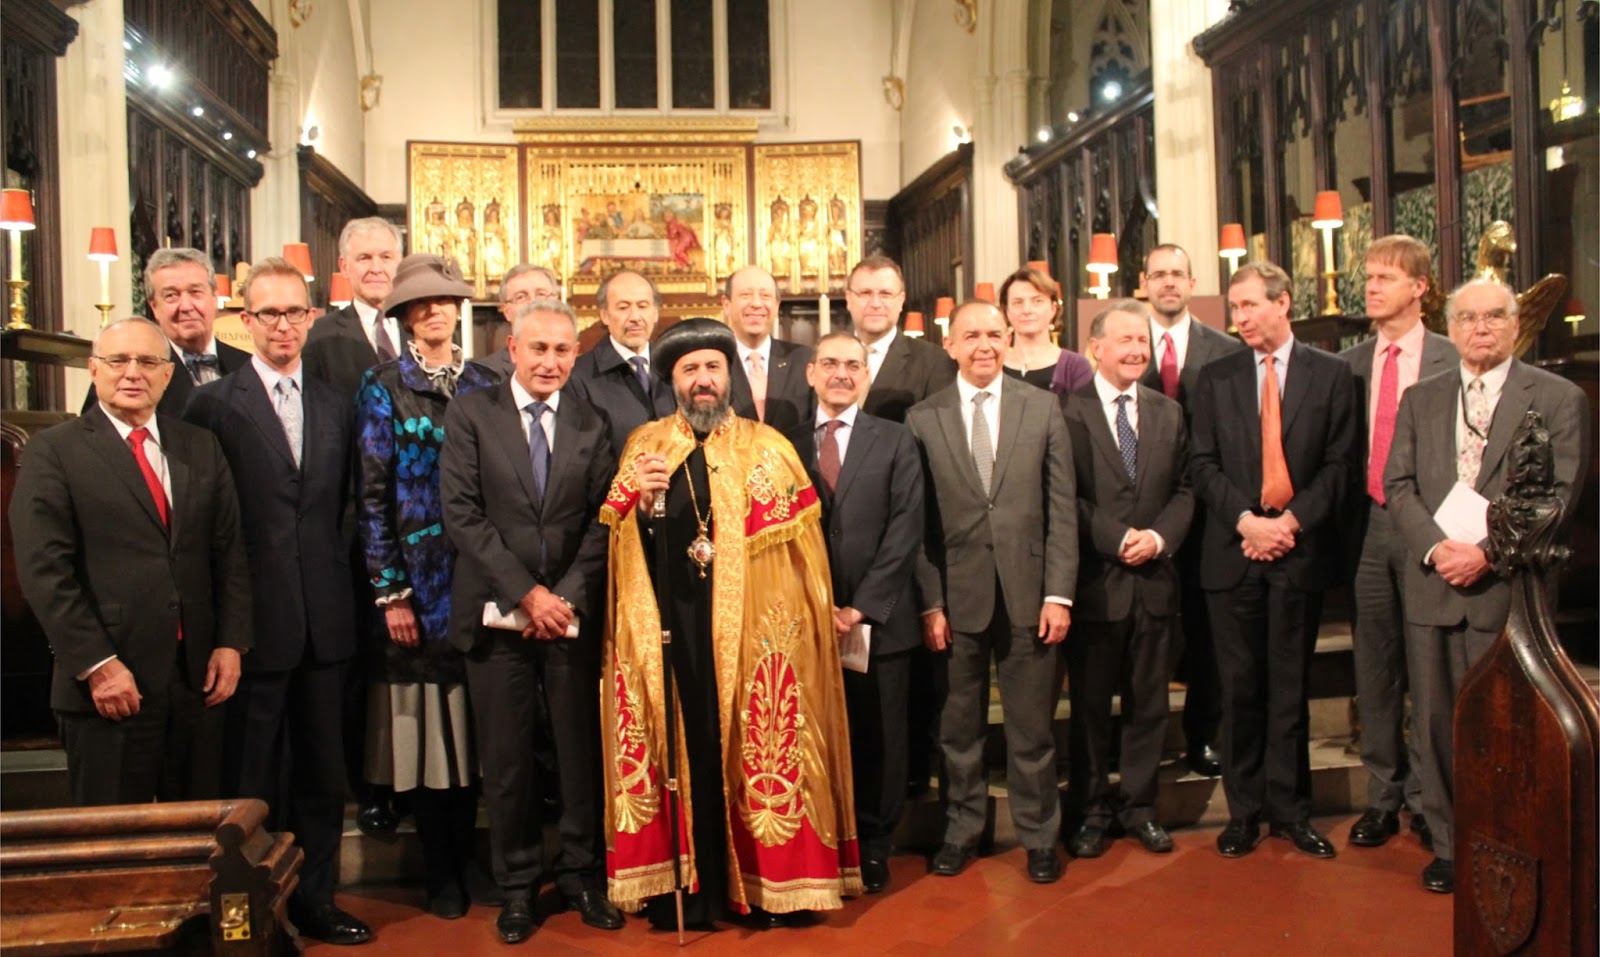 Messages from HRH The Prince of Wales, the Prime Minister & the Archbishop of Canterbury received as religious freedom is highlighted in annual Coptic New Year (Nayrouz) Service at Westminster Abbey